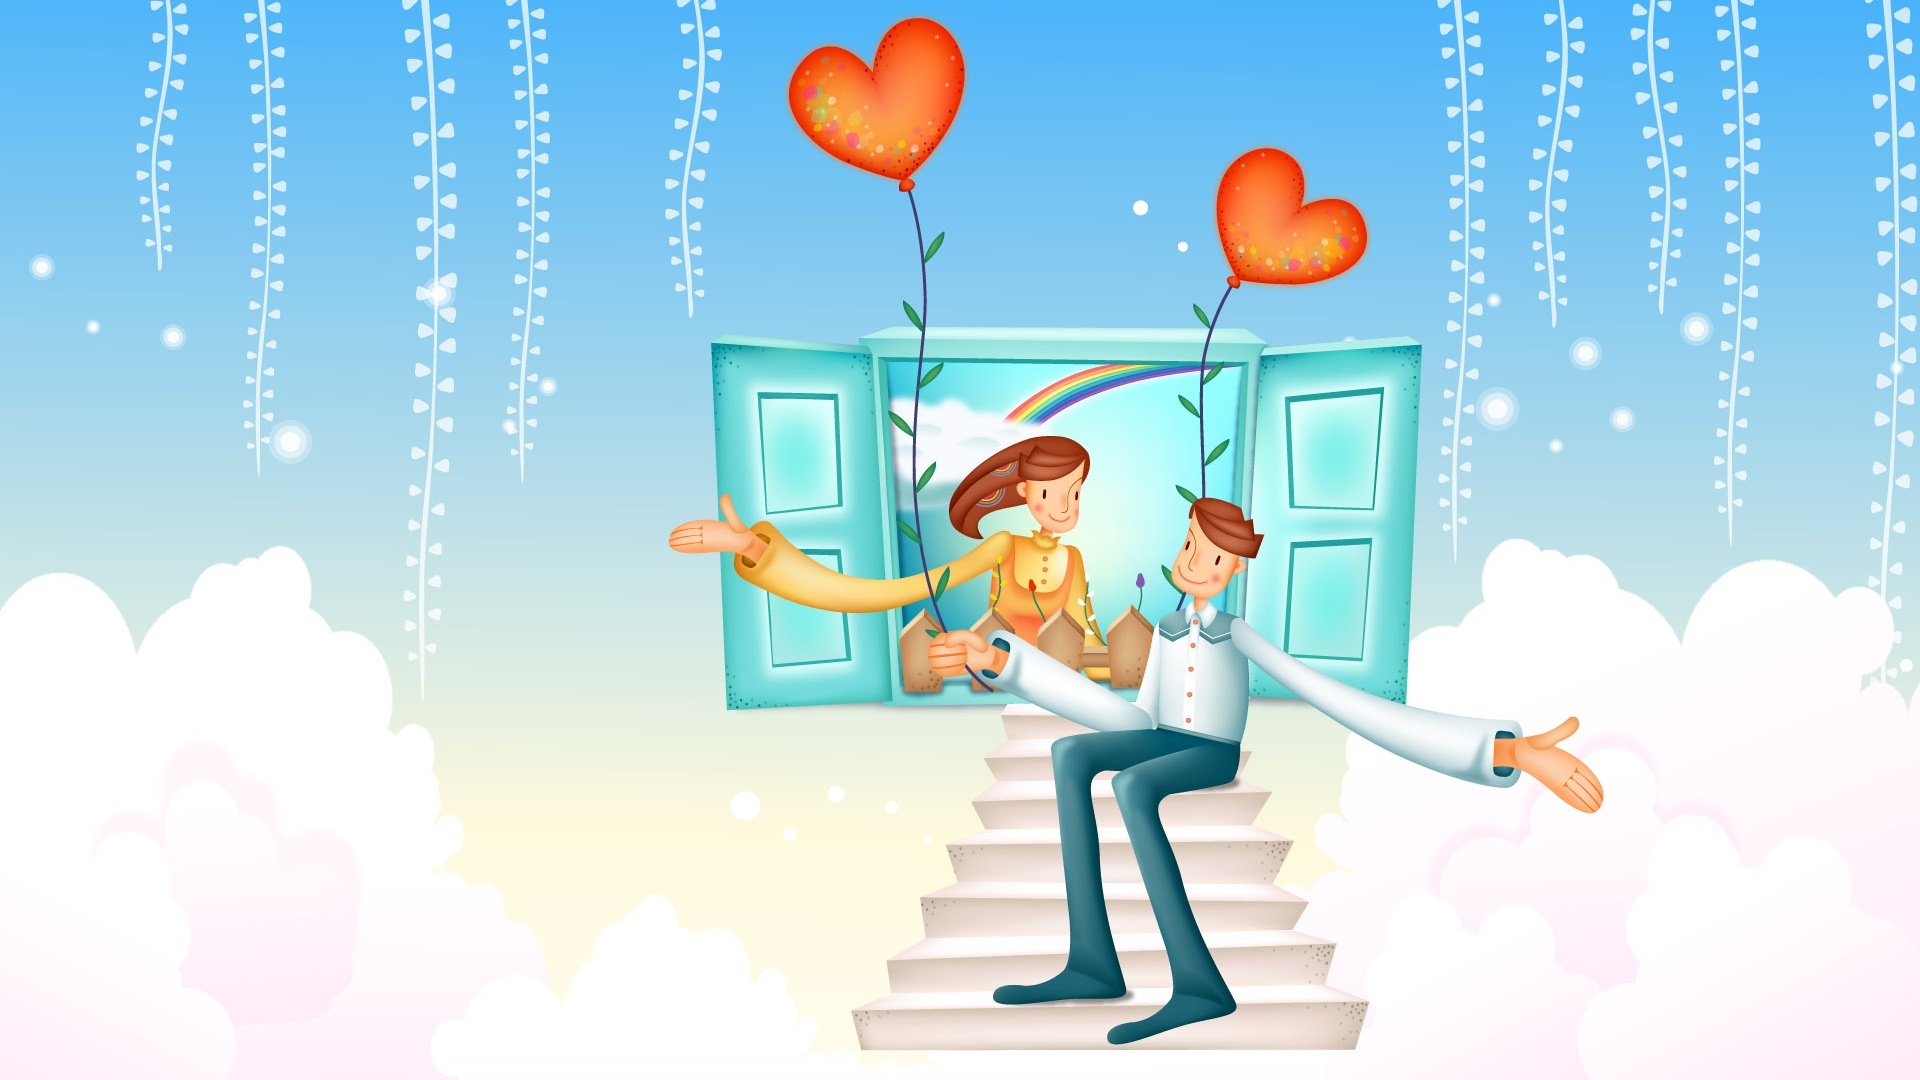 Happy Valentines Day 2015, Wallpapers, e-Greetings, Download, Couples.